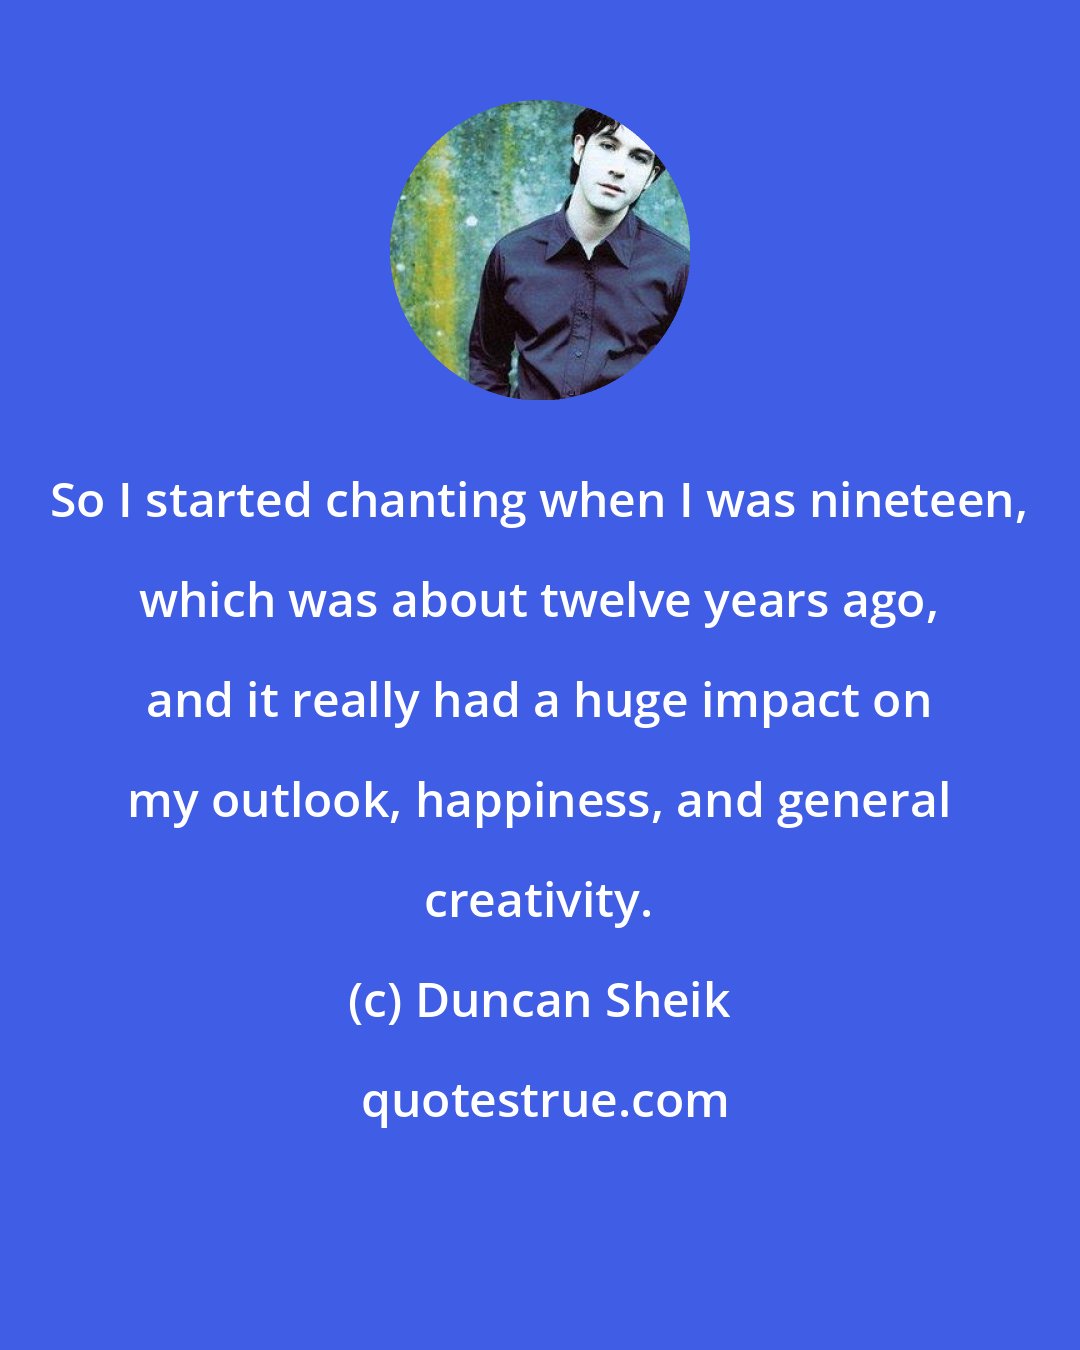 Duncan Sheik: So I started chanting when I was nineteen, which was about twelve years ago, and it really had a huge impact on my outlook, happiness, and general creativity.